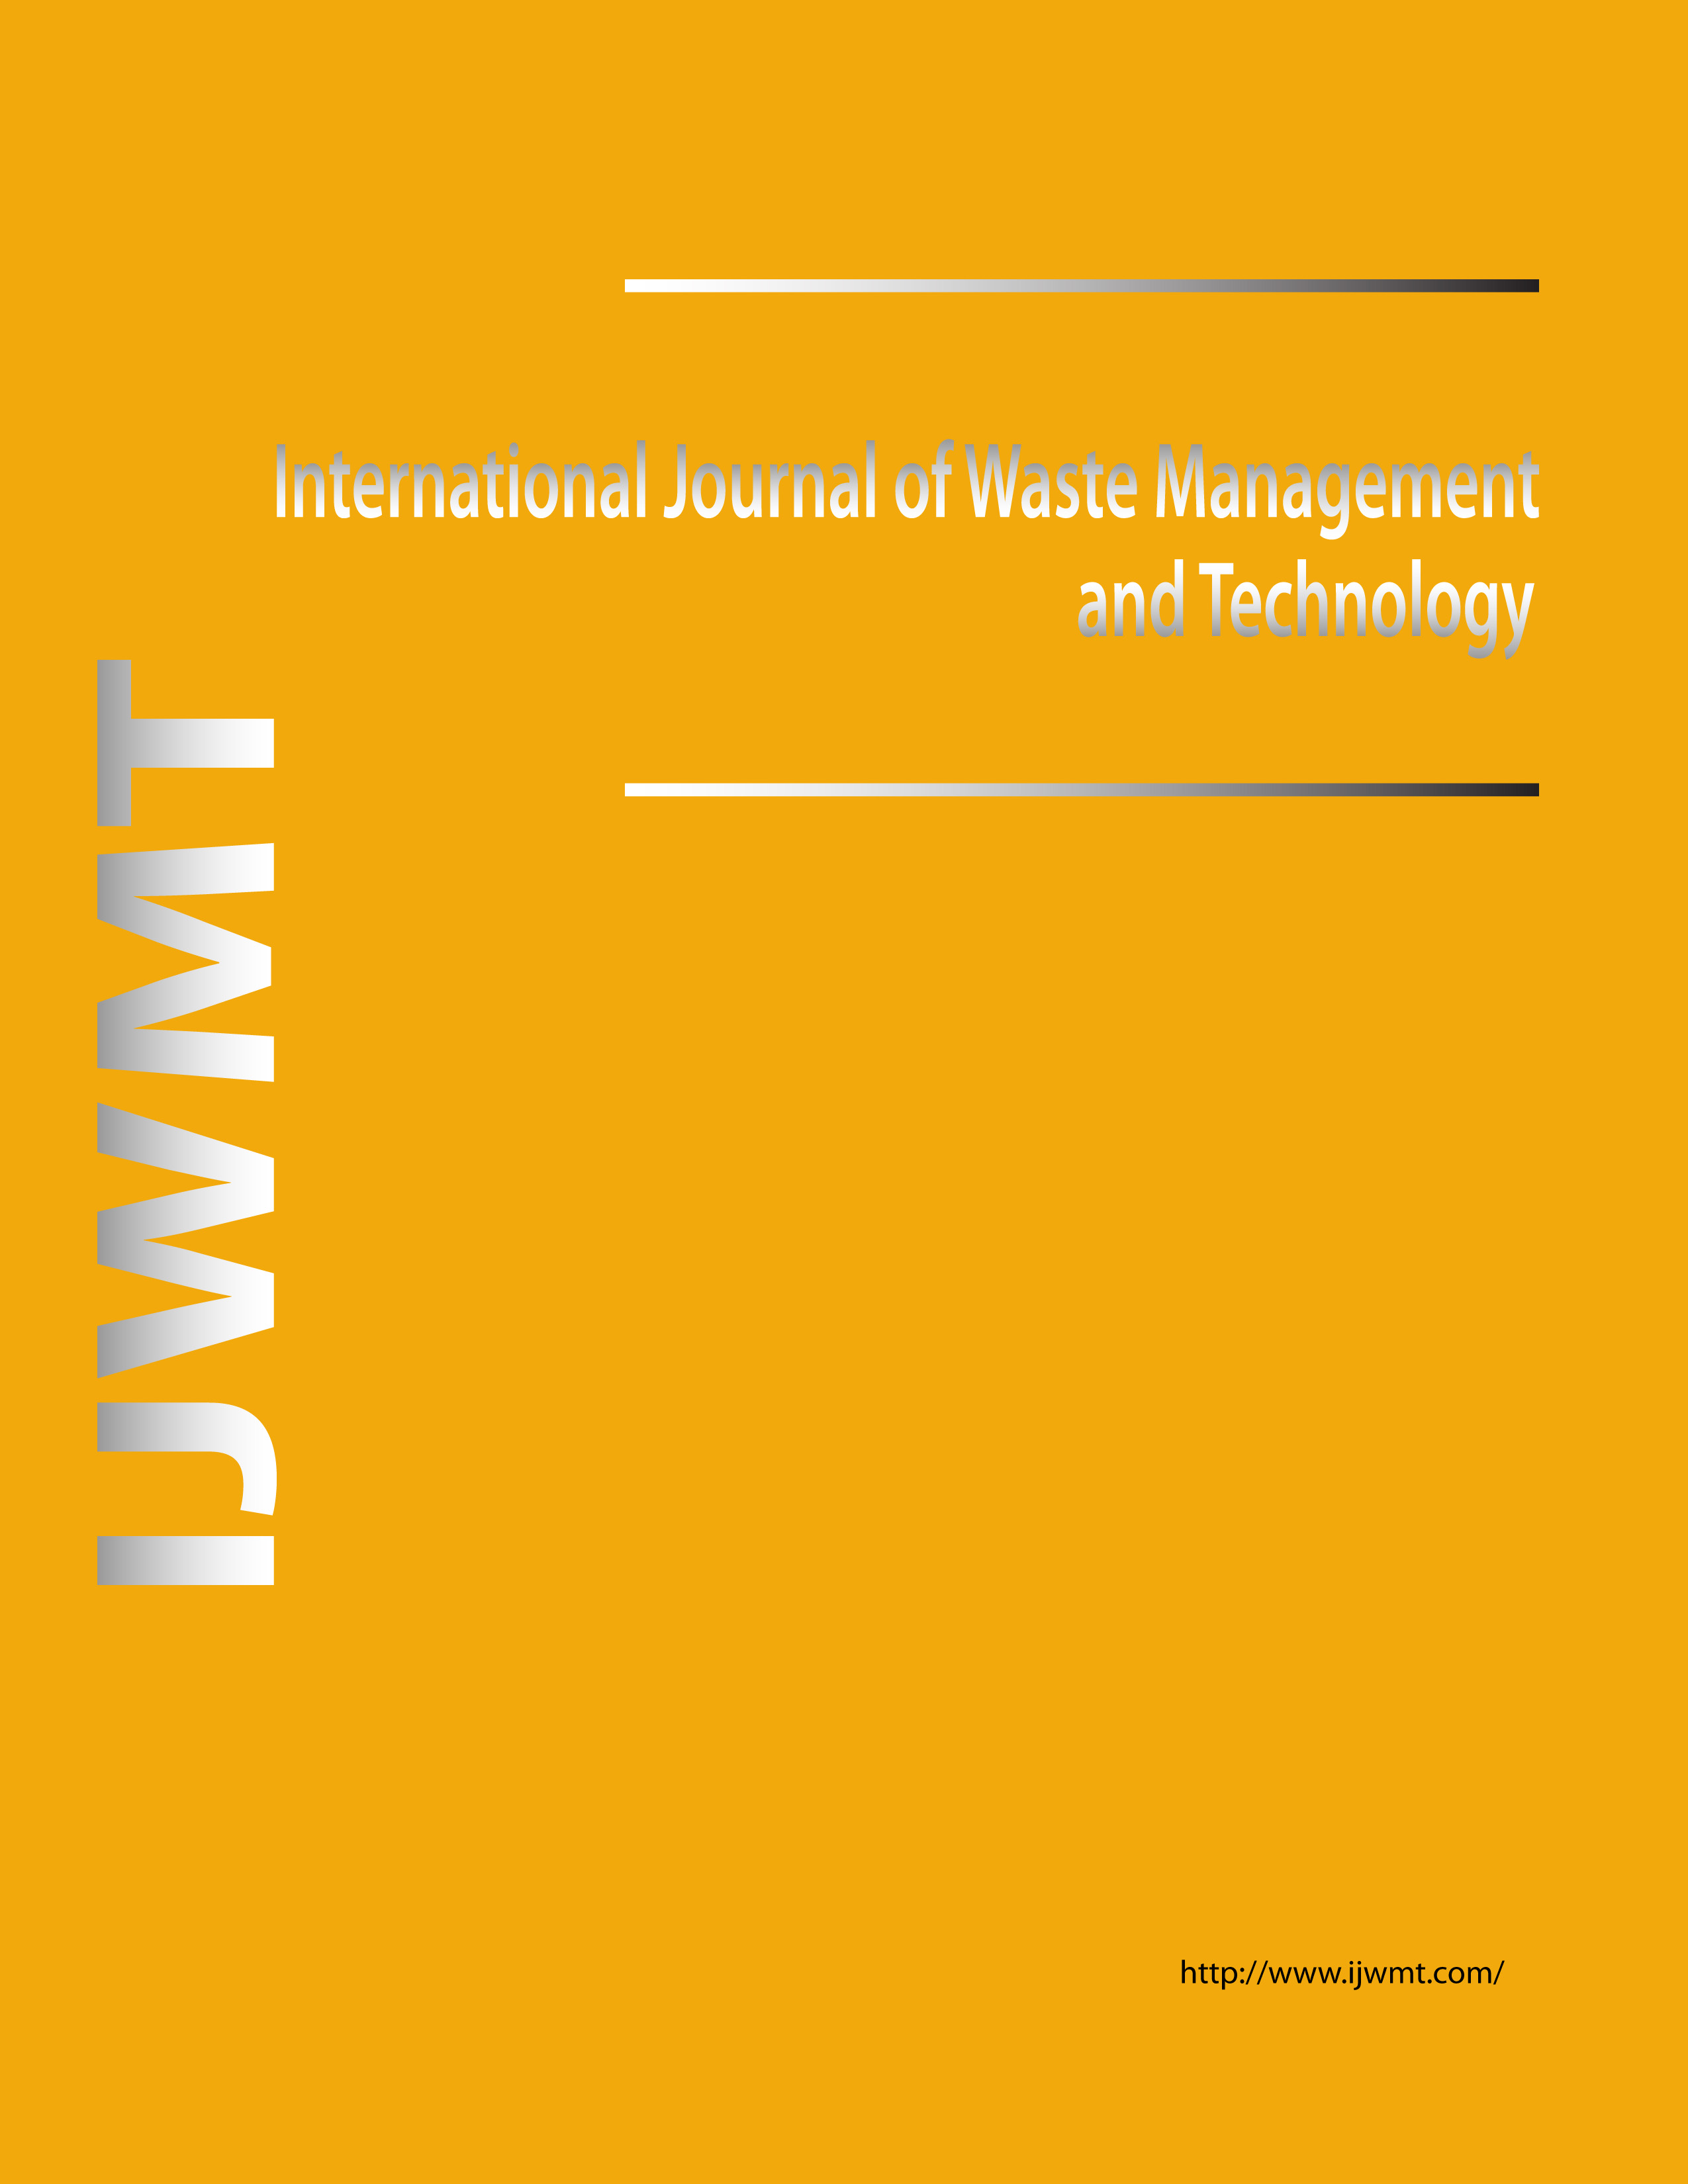 International Journal of Waste Management and Technology